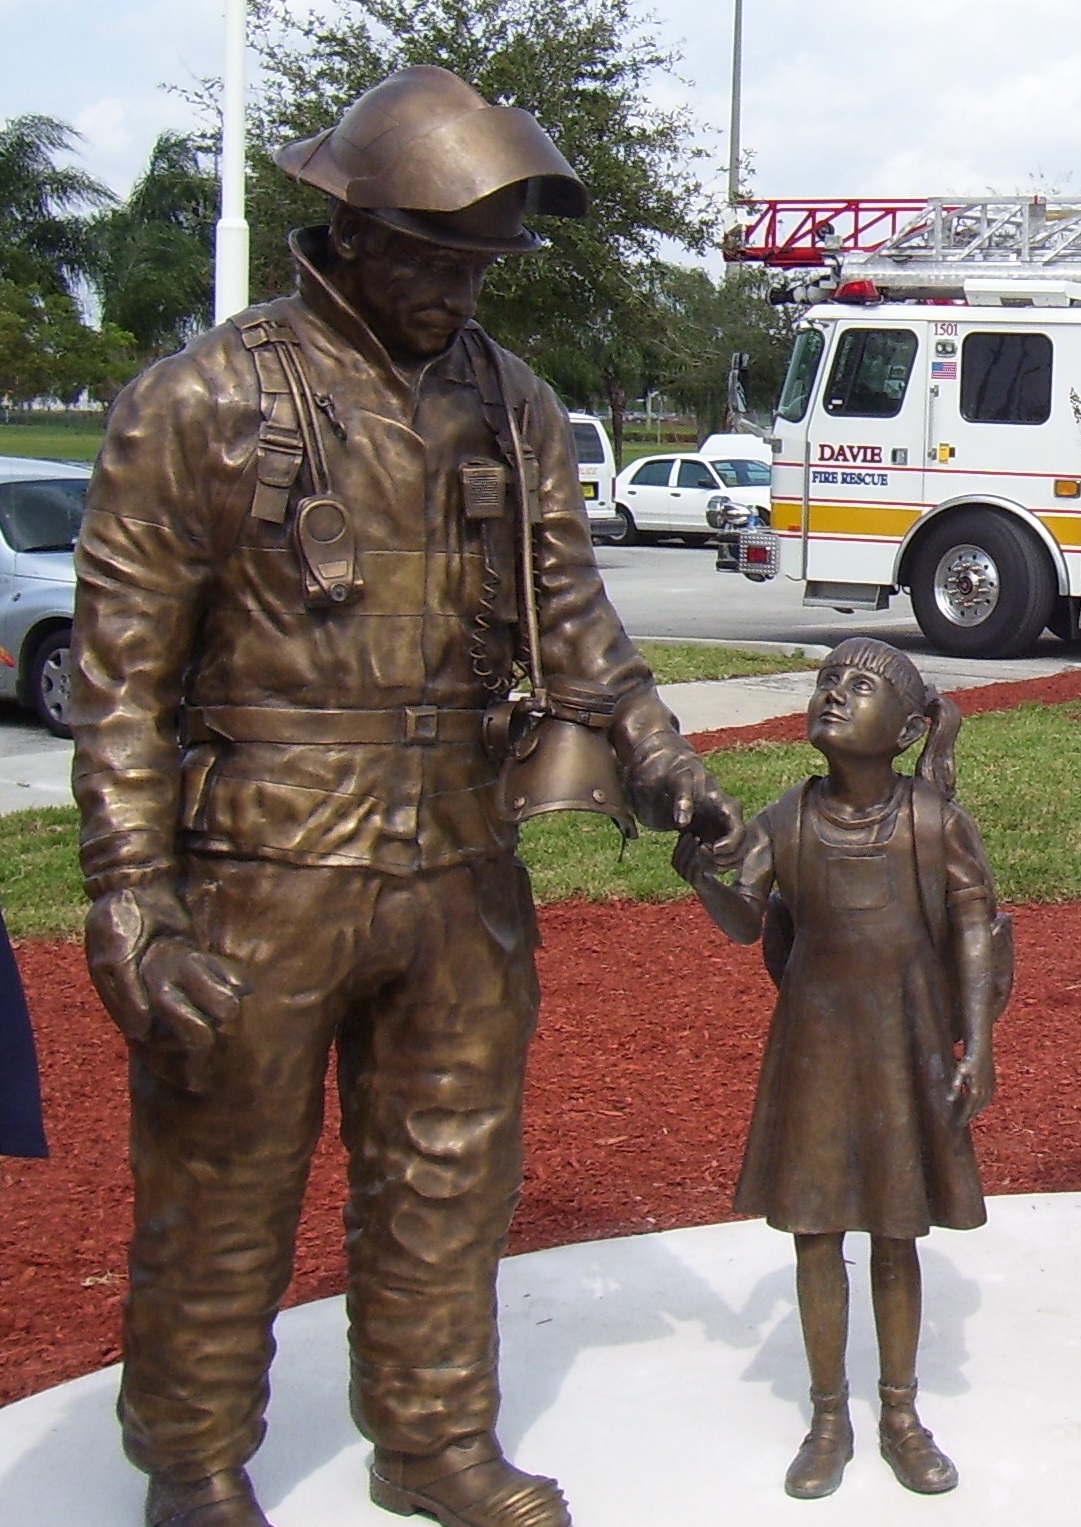 firefighter monument holding child's hand